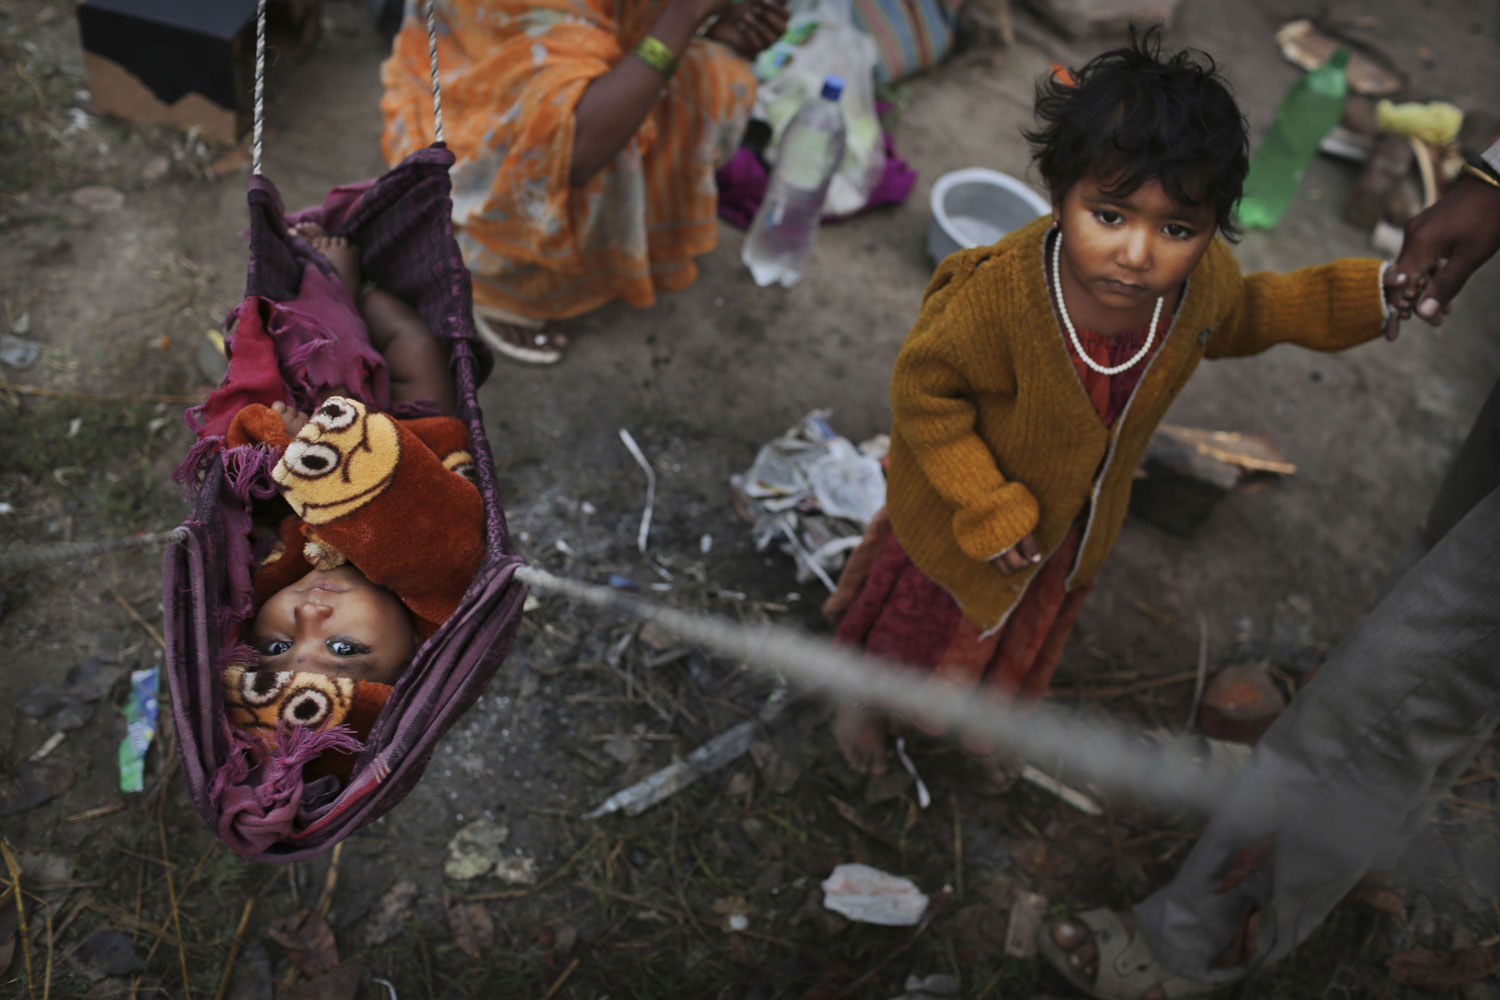 Image: Nov. 8, 2012. Indian baby Priya hangs in a makeshift bed as her sister stands next to her at a shanty where their family lives New Delhi.